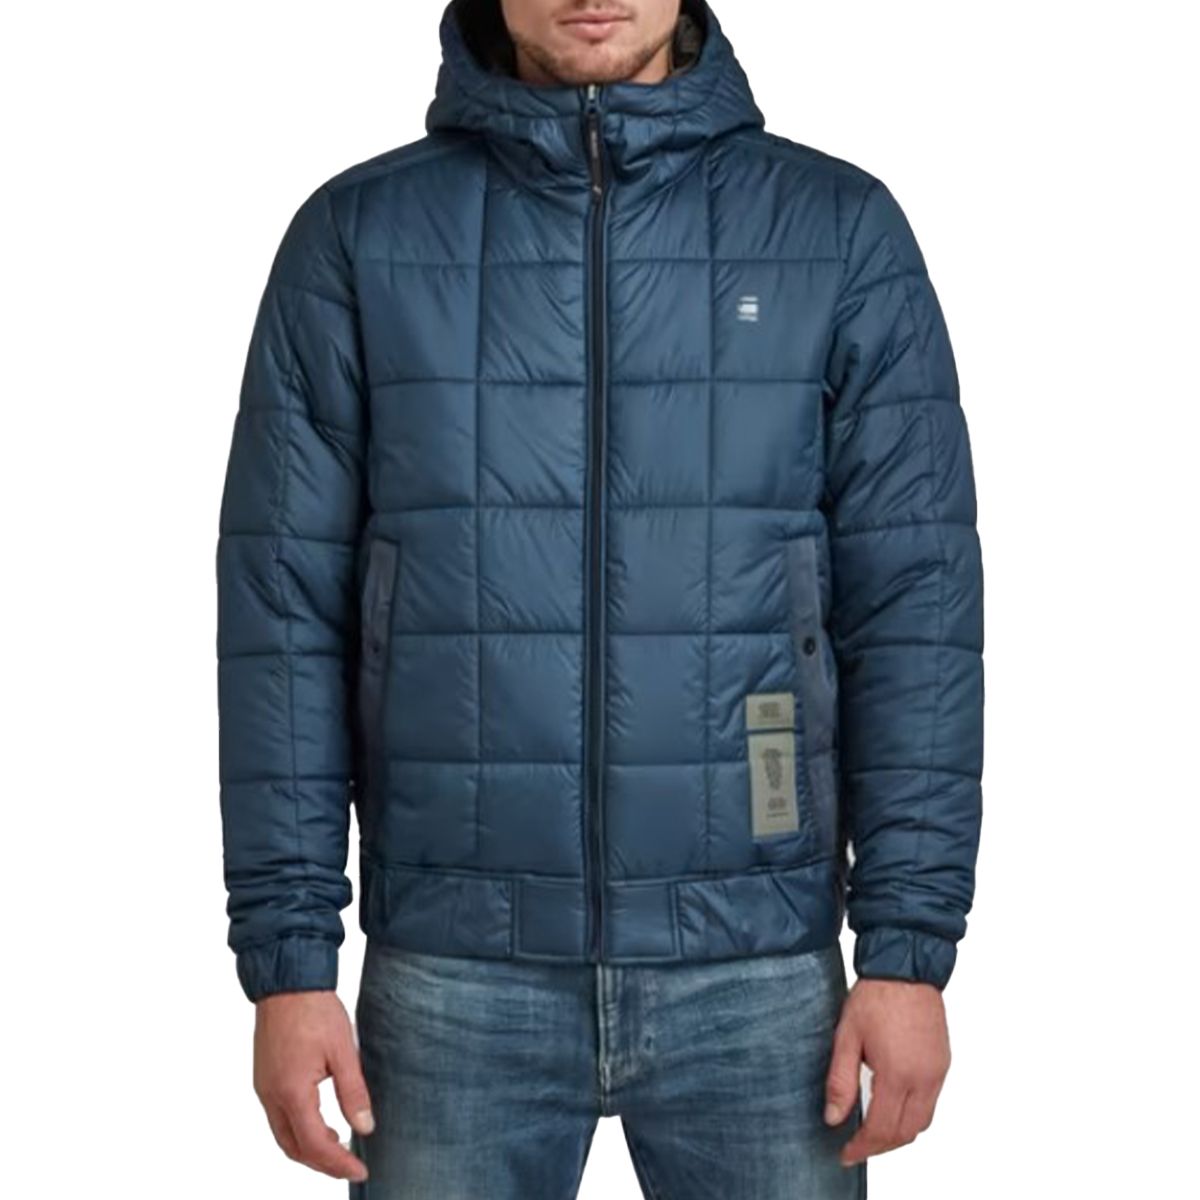 Meefic Square Quilted Hooded Jacket